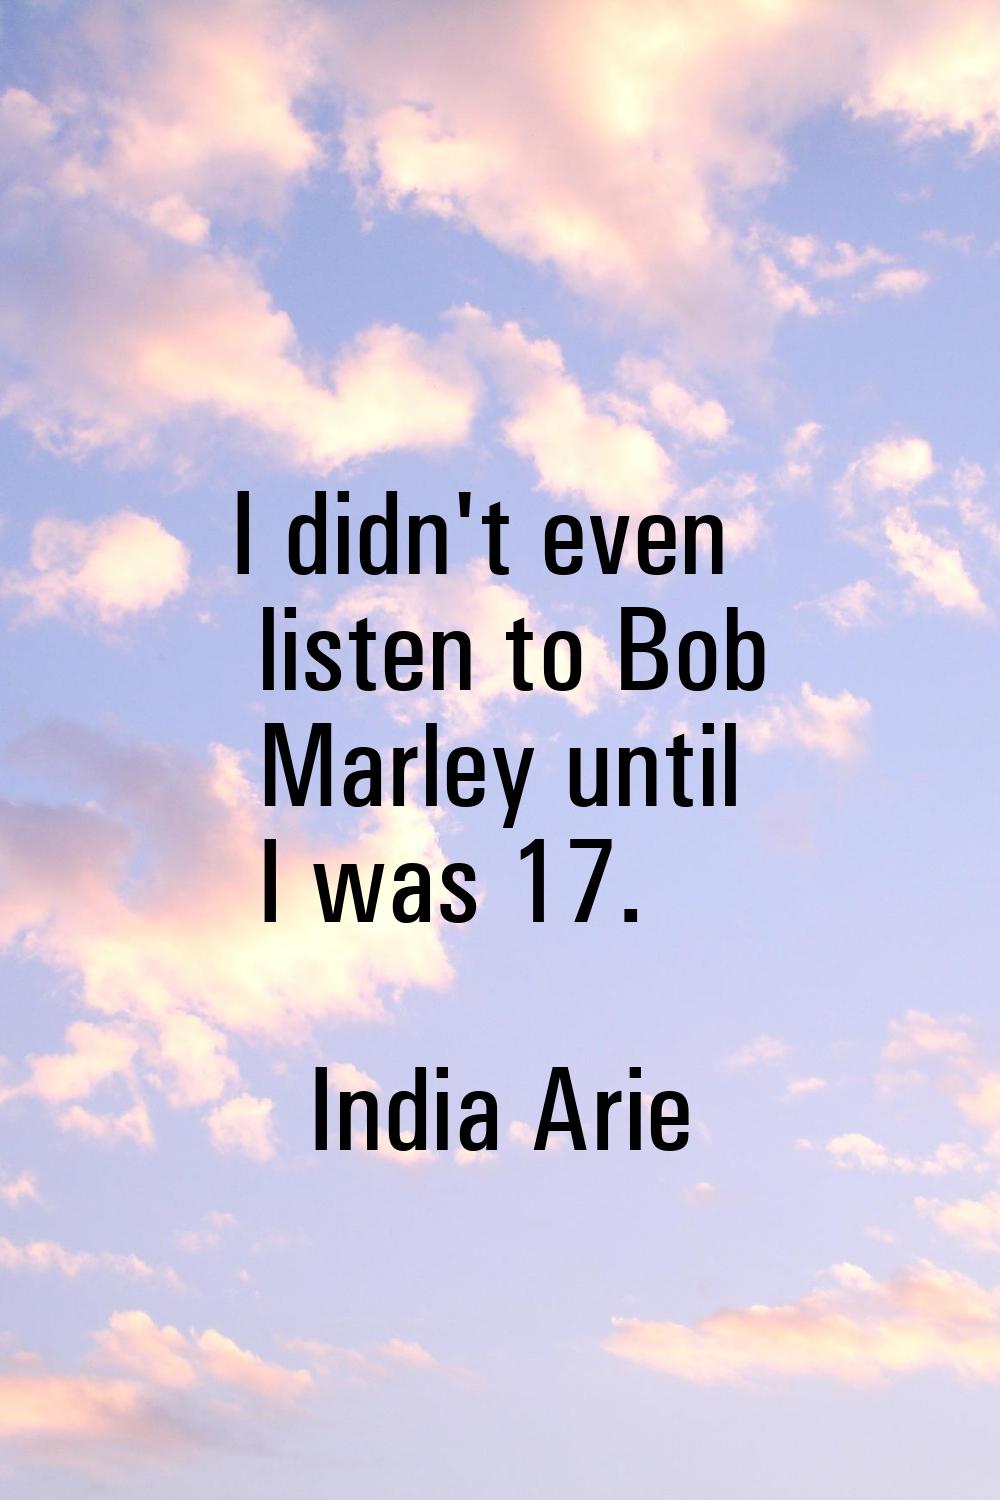 I didn't even listen to Bob Marley until I was 17.